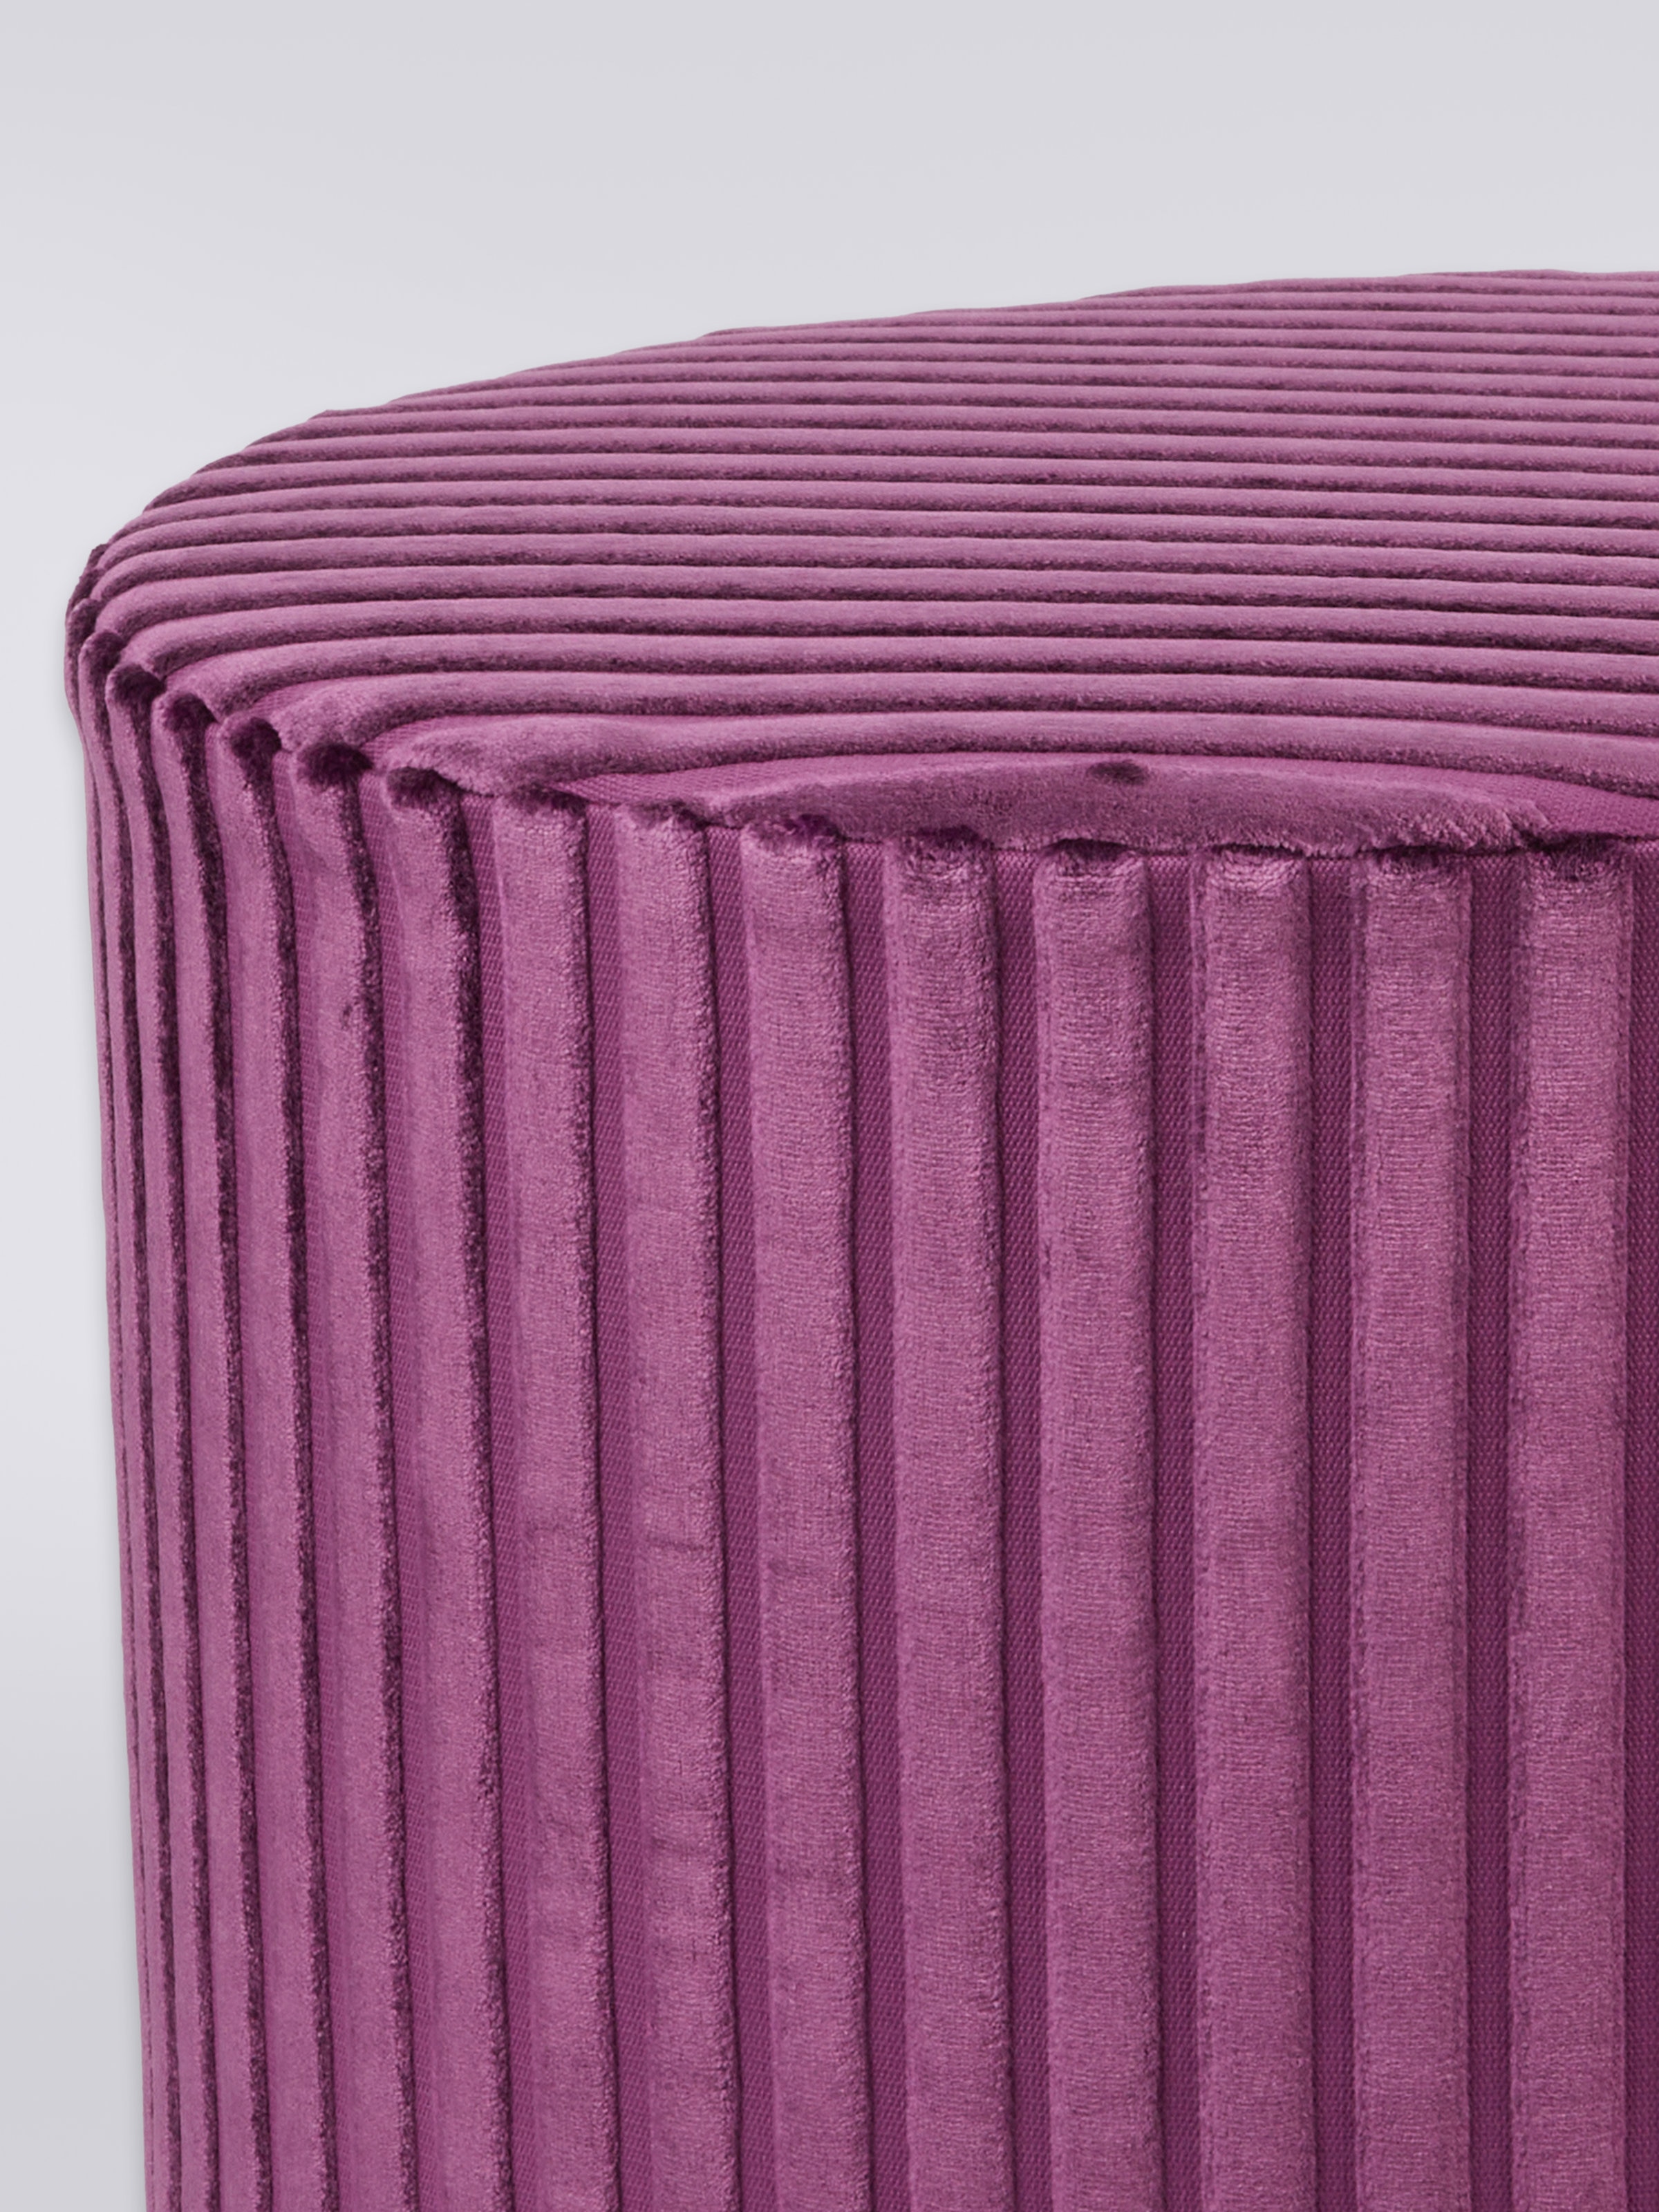 Coomba Cylinder Pouf 40X30, Purple  - 2